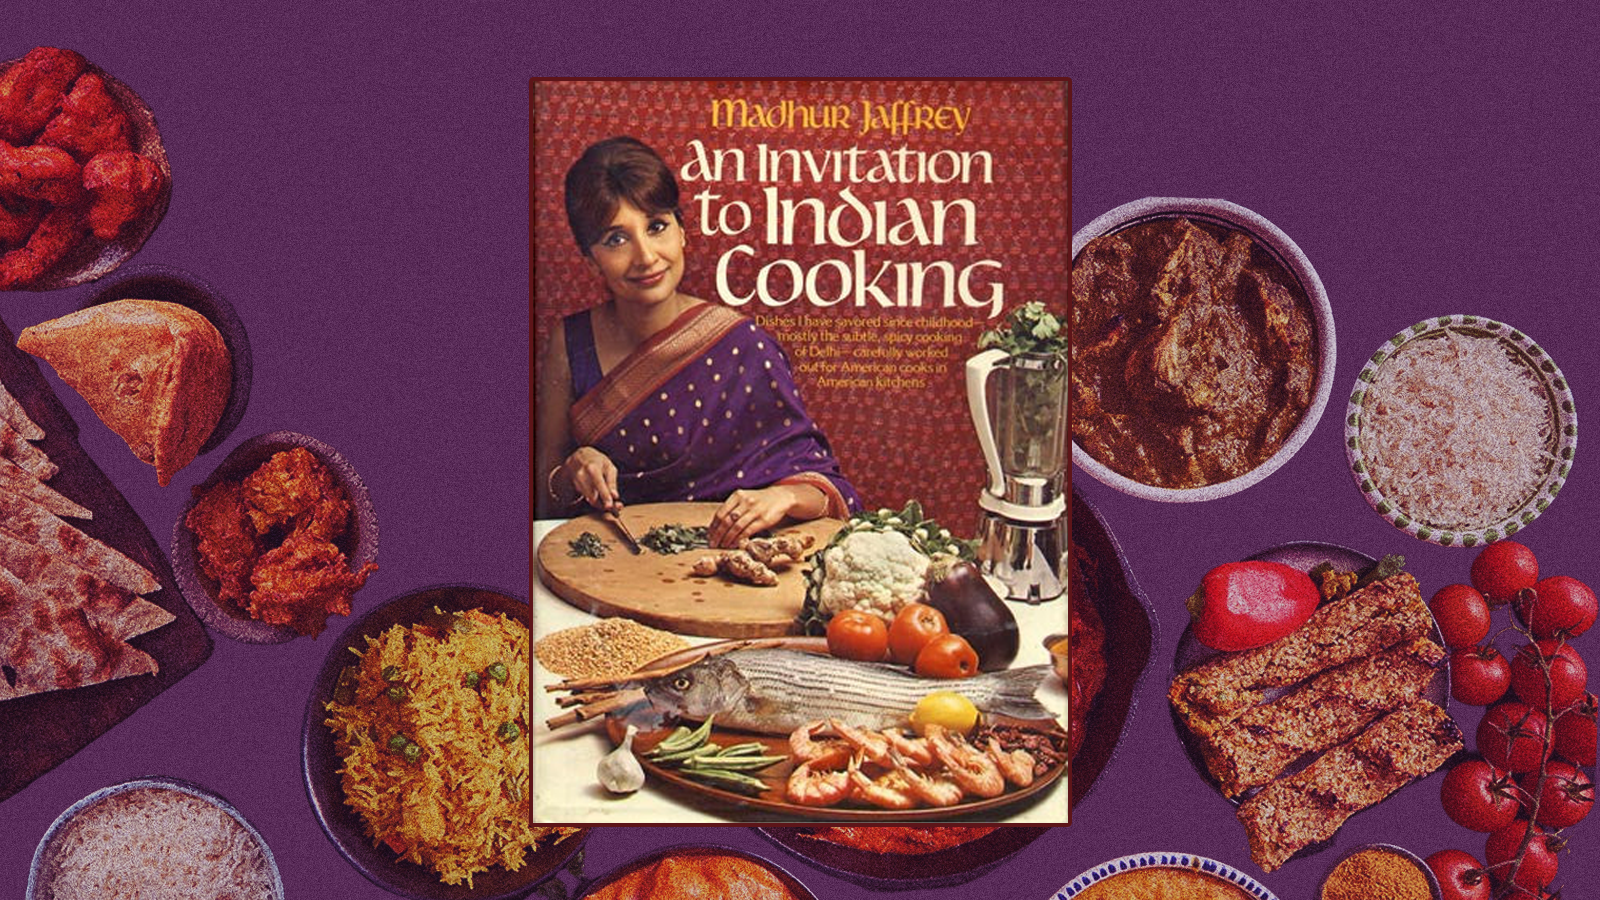 The cover of the 1973 edition of An Invitation to Indian Cooking: Madhur Jaffrey, wearing a purple sari, stands behind a table full of ingredients.